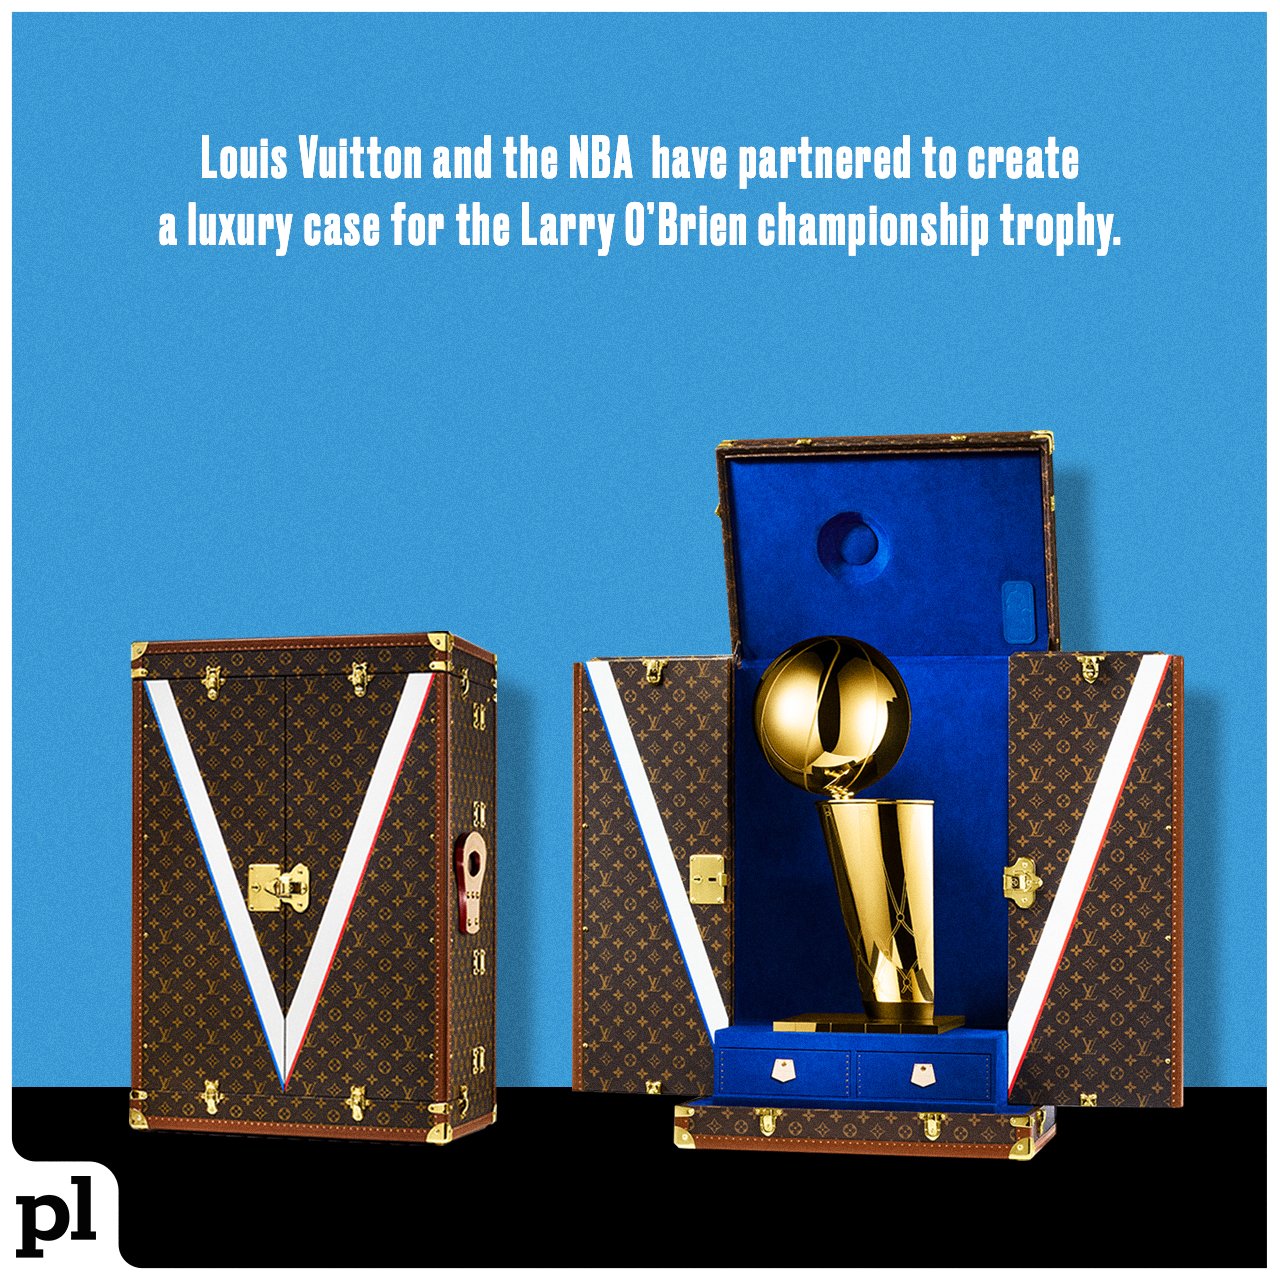 Players' Lounge on X: We have a feeling this case will make an appearance  in NBA 2K21. The NBA teamed up with Louis Vuitton to create the league's  first travel case for